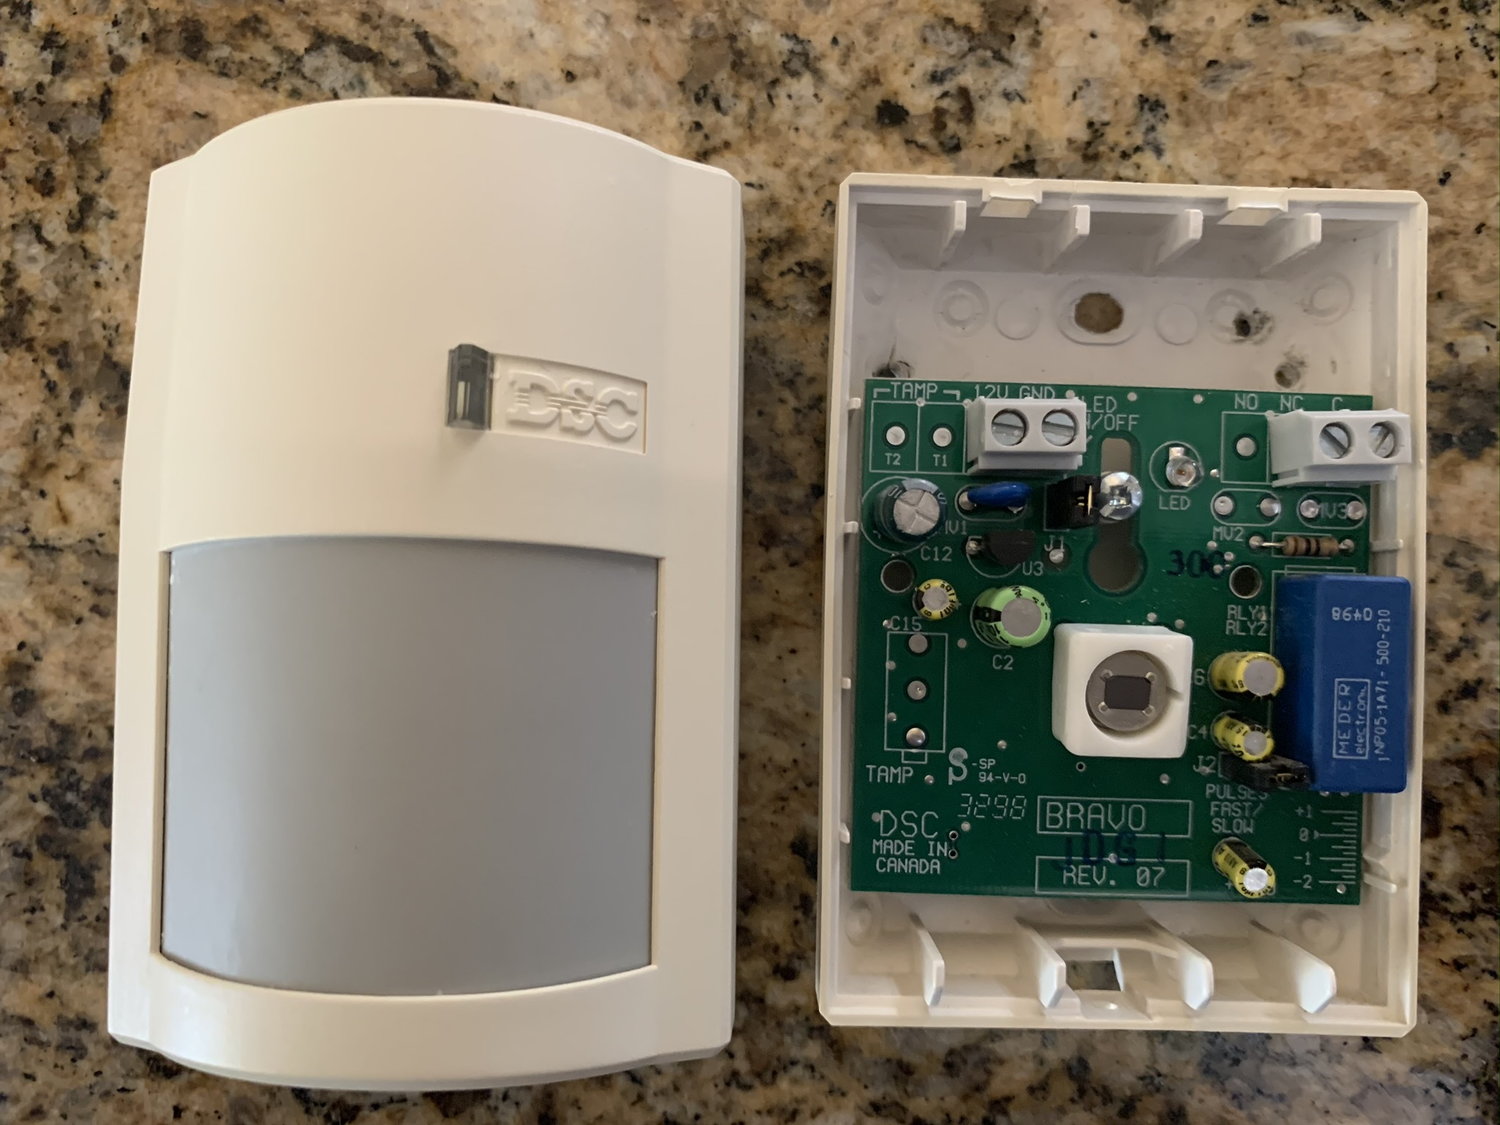 How To Troubleshoot A DSC Motion Detector